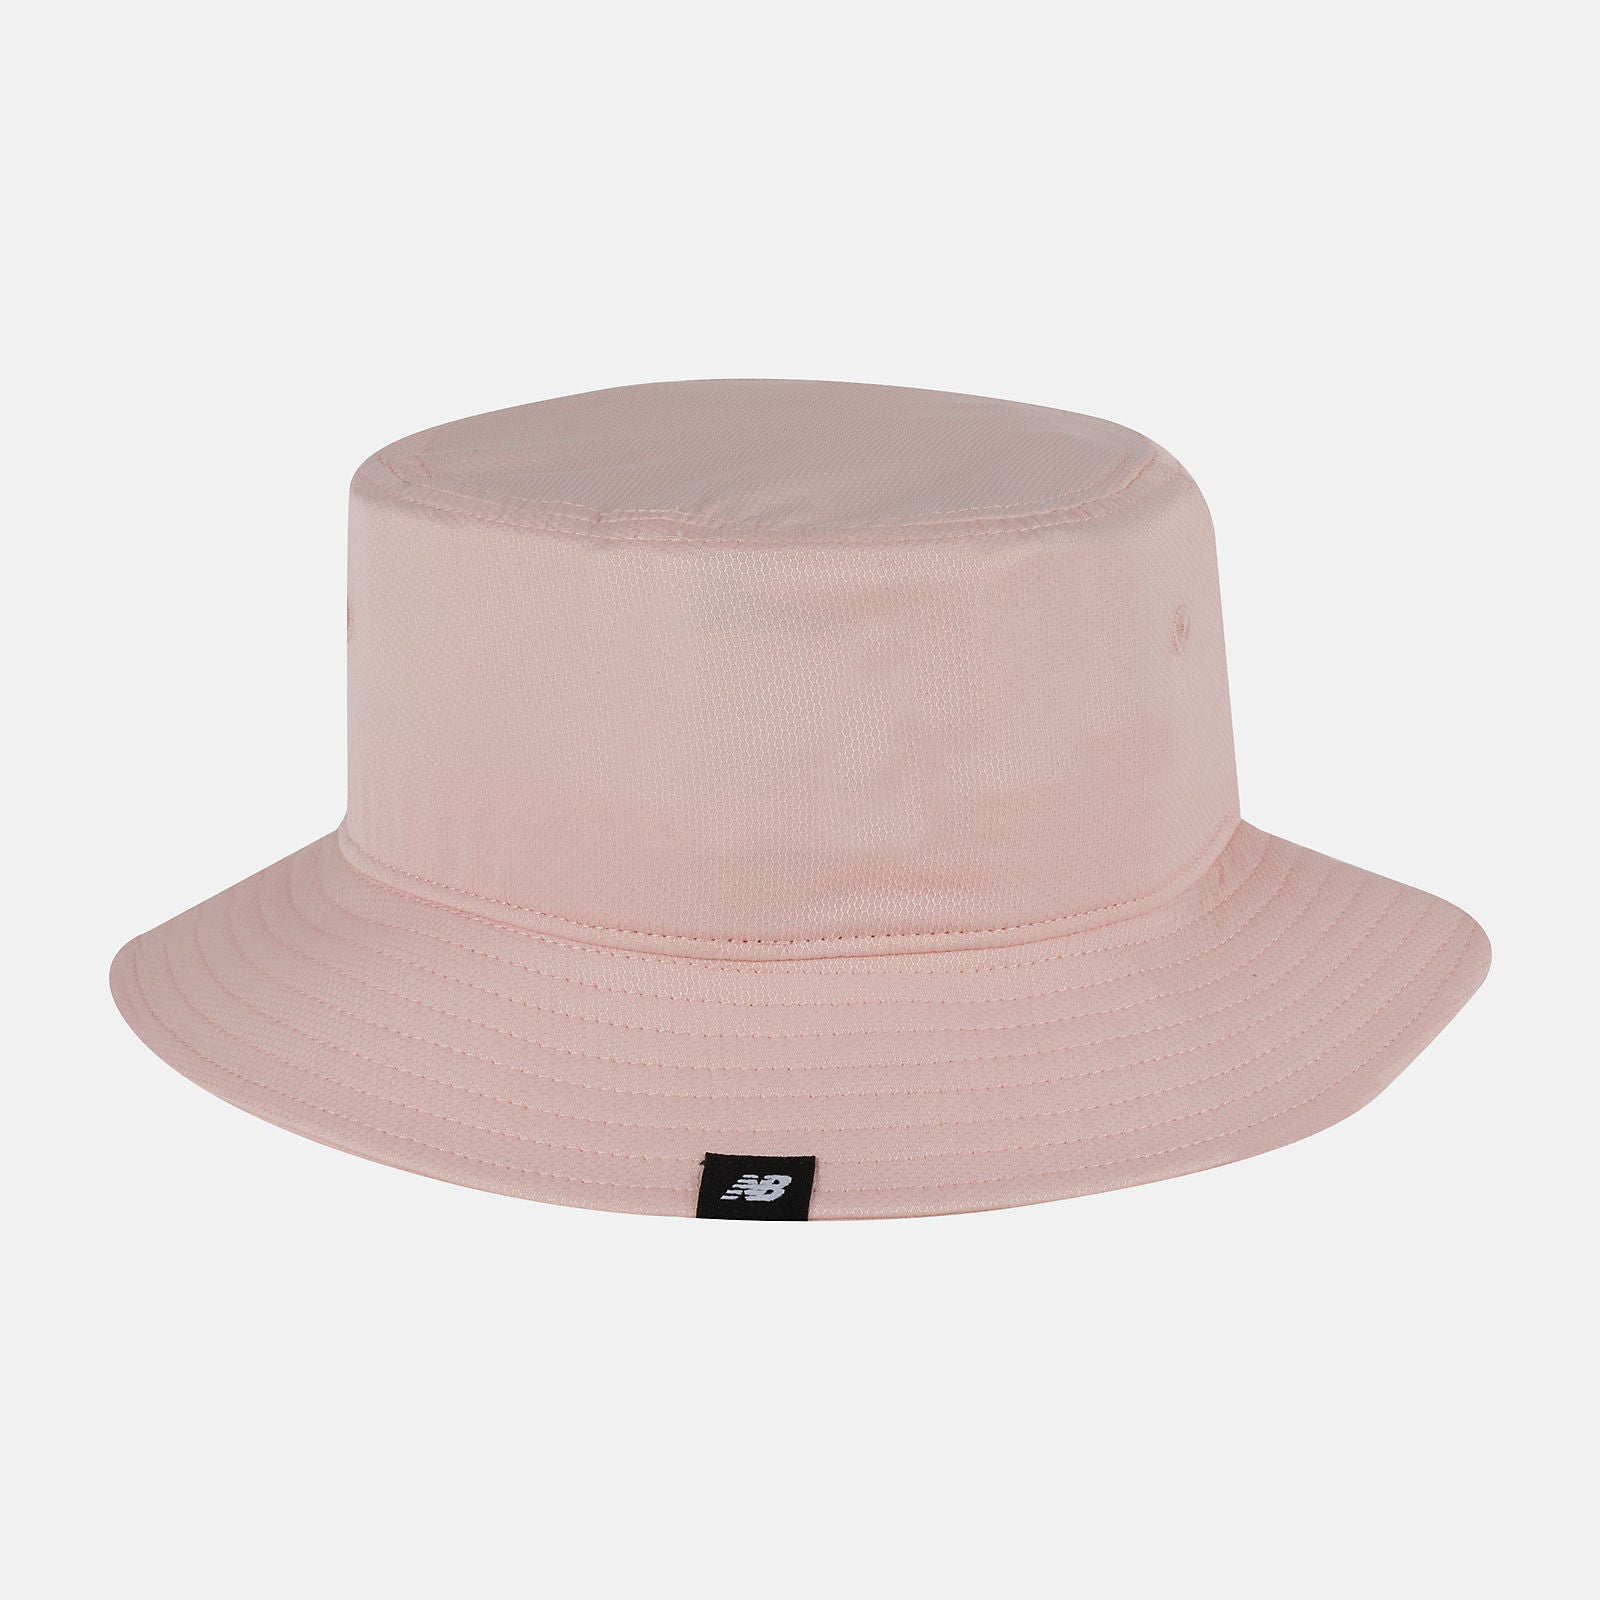 NEW BALANCE Kid&#39;s Bucket Hat in Light Pink LAH31007 O/S PINK HAZE FROM EIGHTYWINGOLD - OFFICIAL BRAND PARTNER